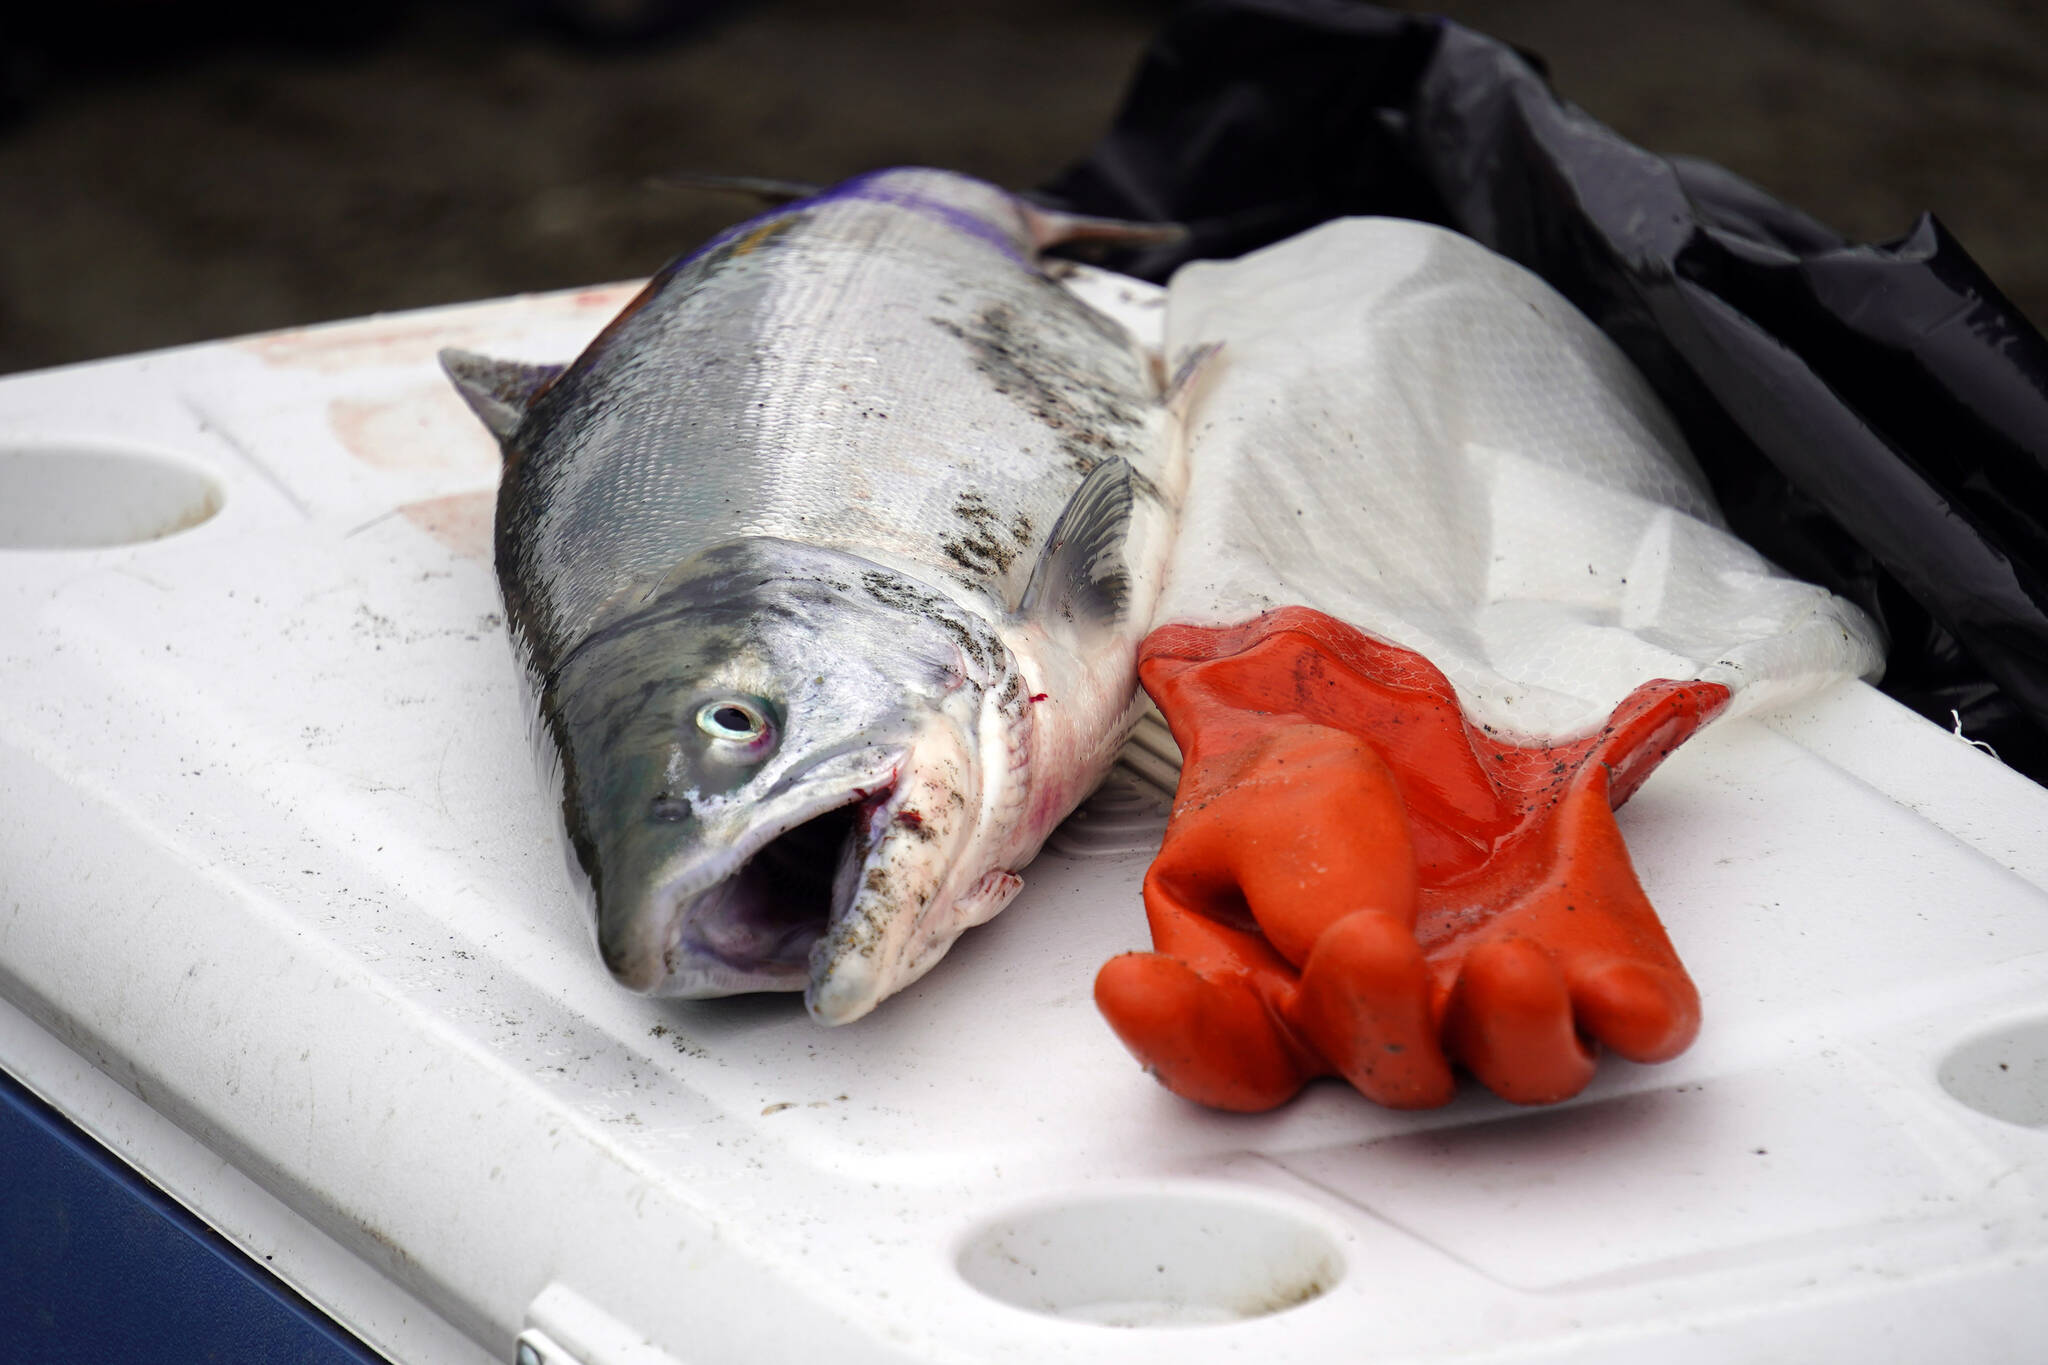 Board of fisheries OKs dipnets for Cook Inlet commercial fisheries